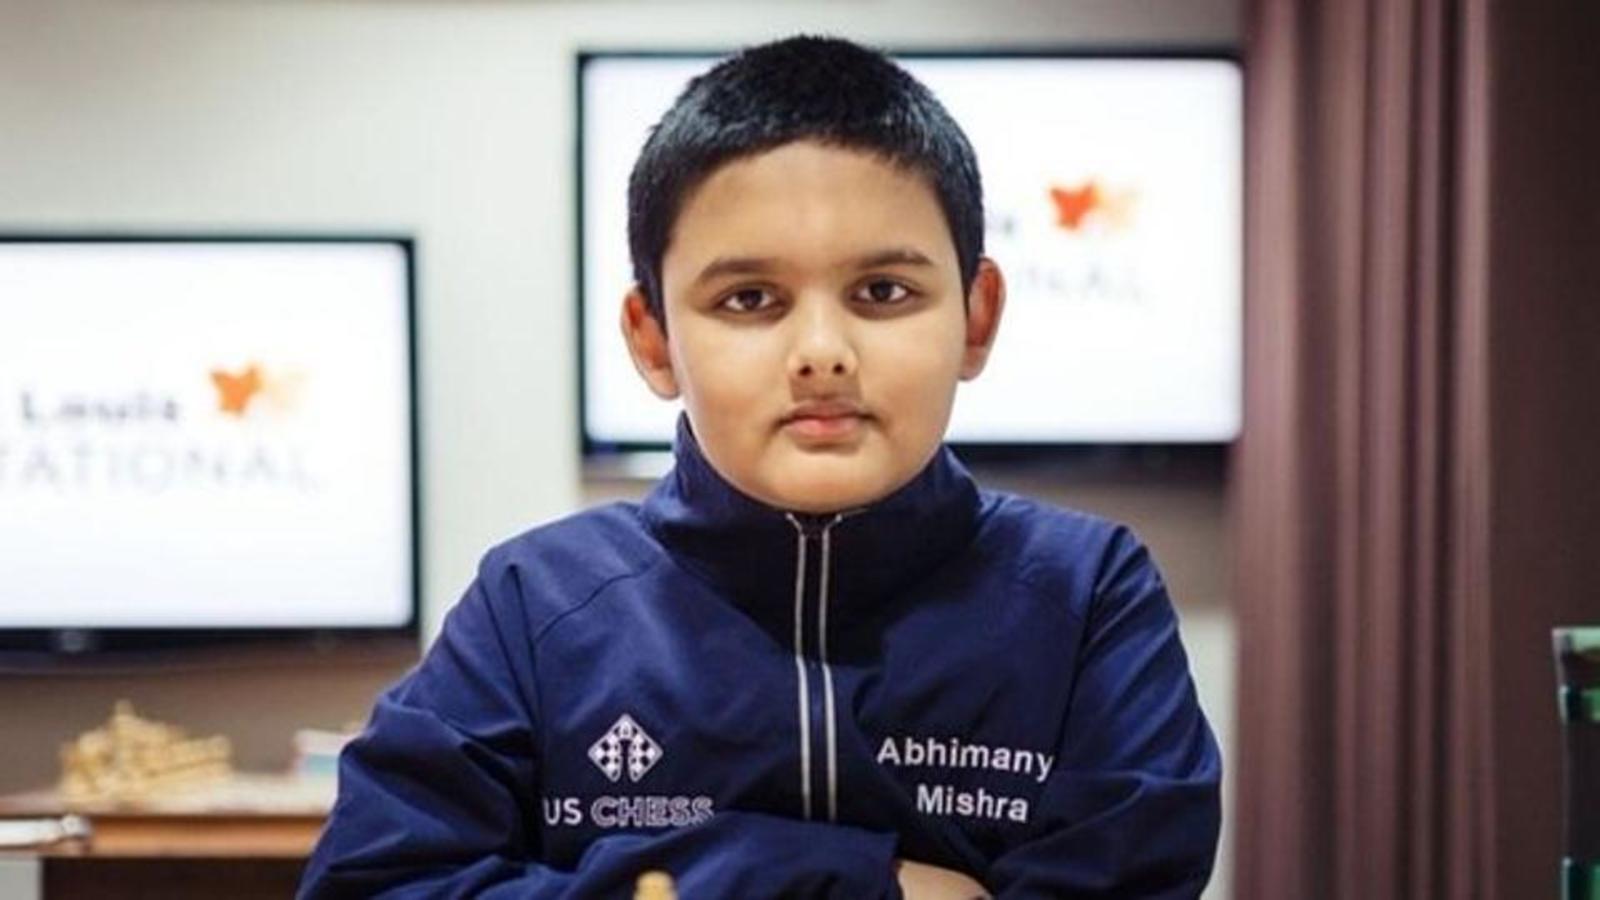 12-year-old from New Jersey becomes world's youngest chess